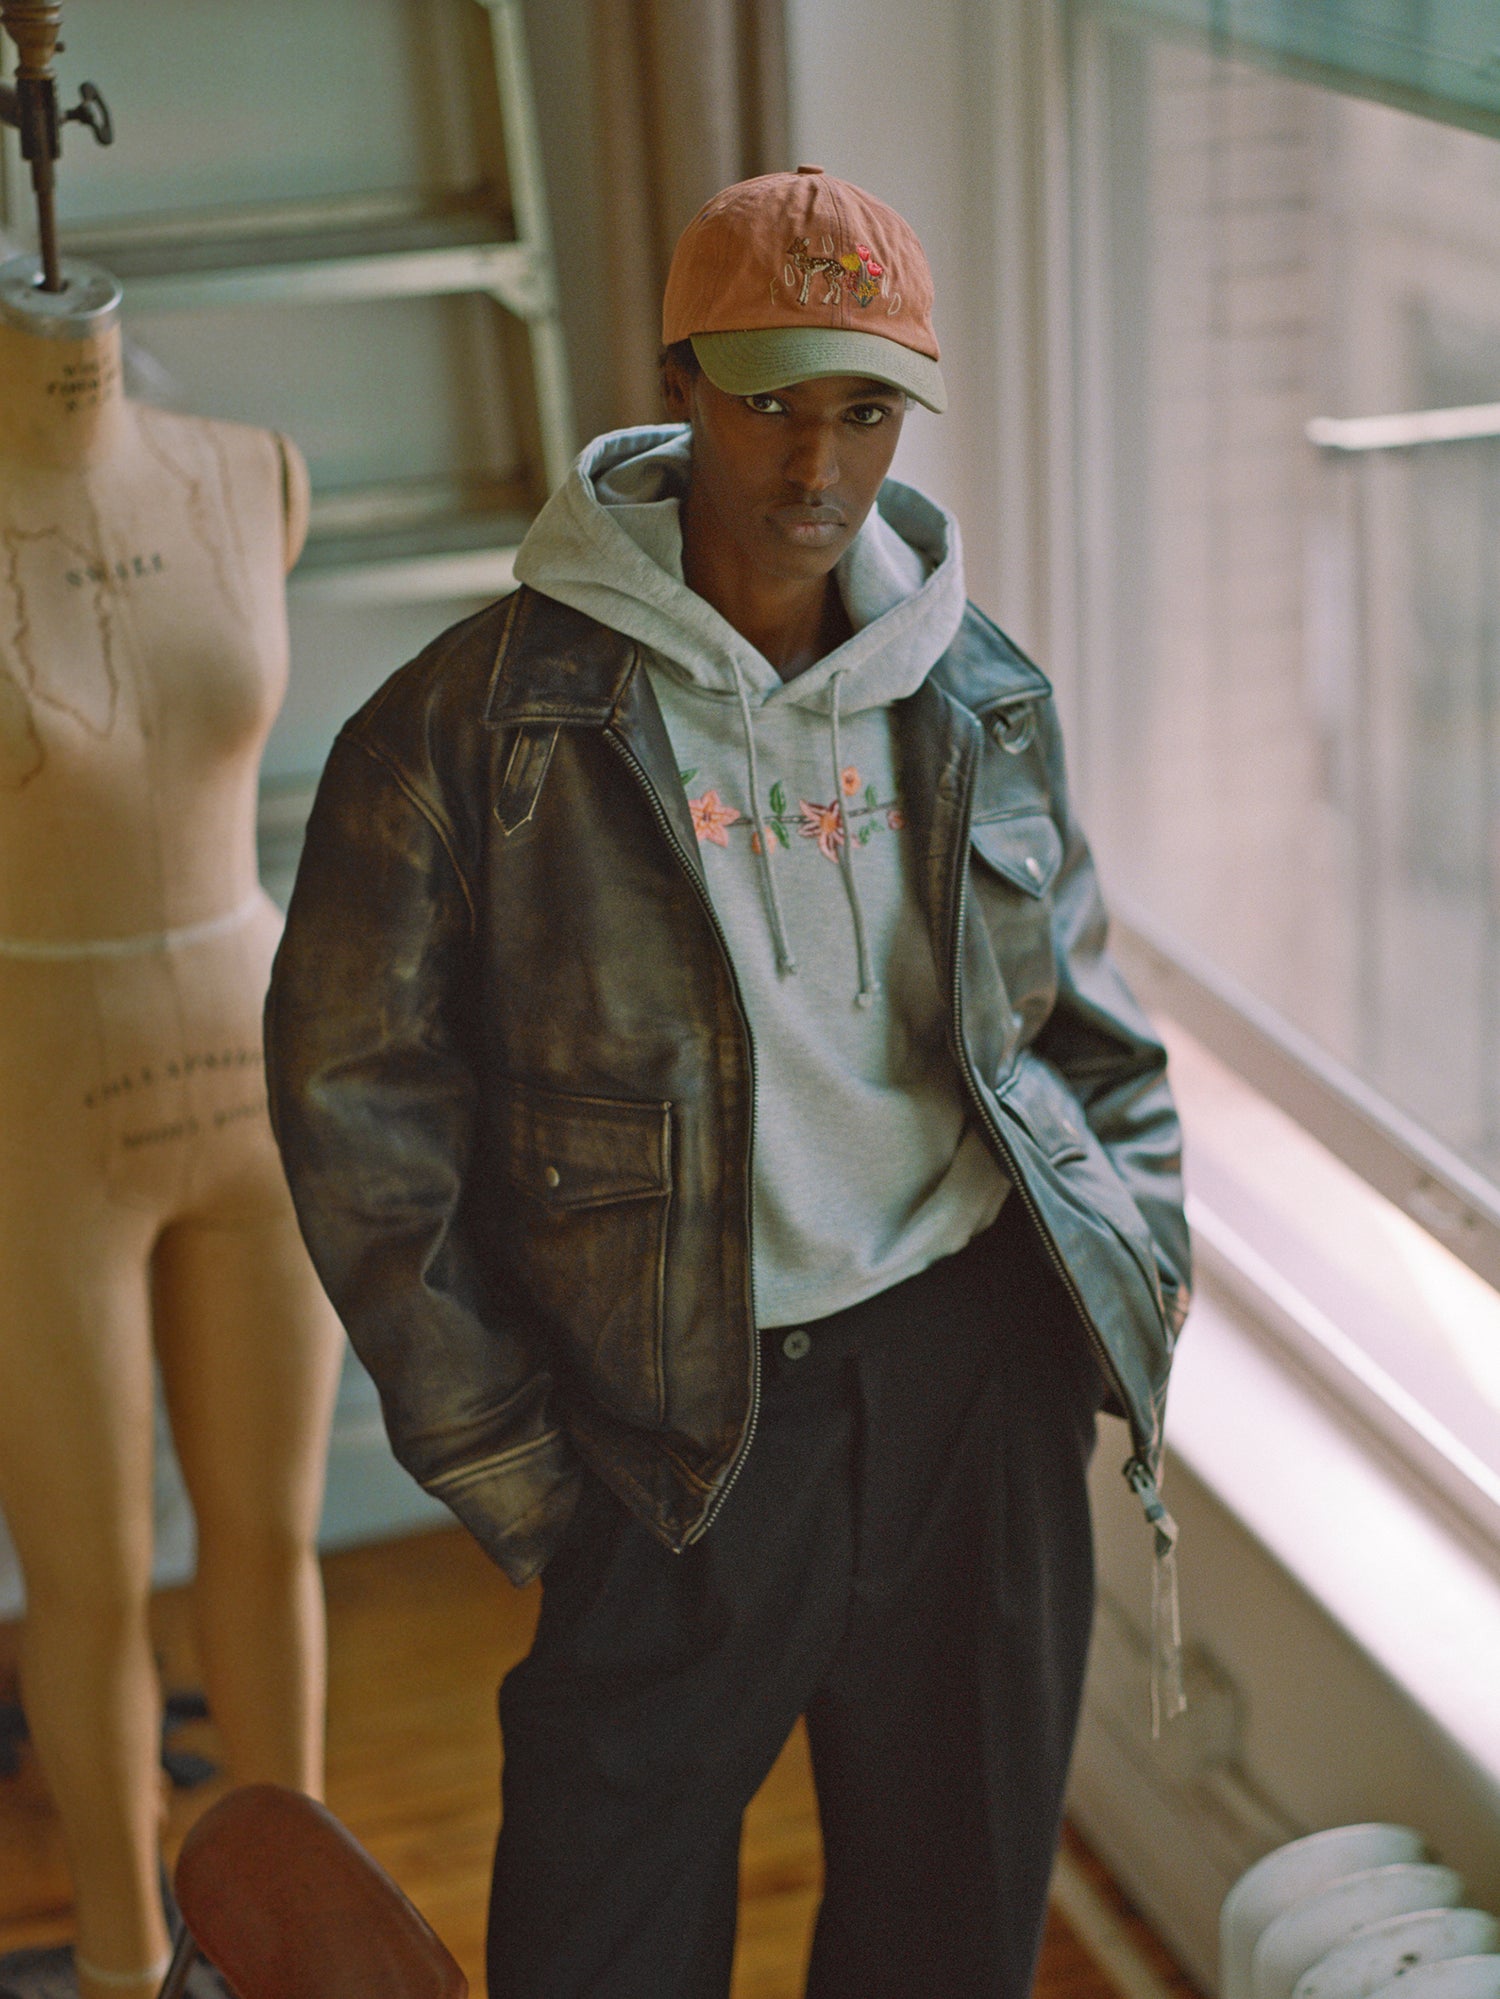 A man in a Found distressed leather pocket jacket and hat standing next to a mannequin.